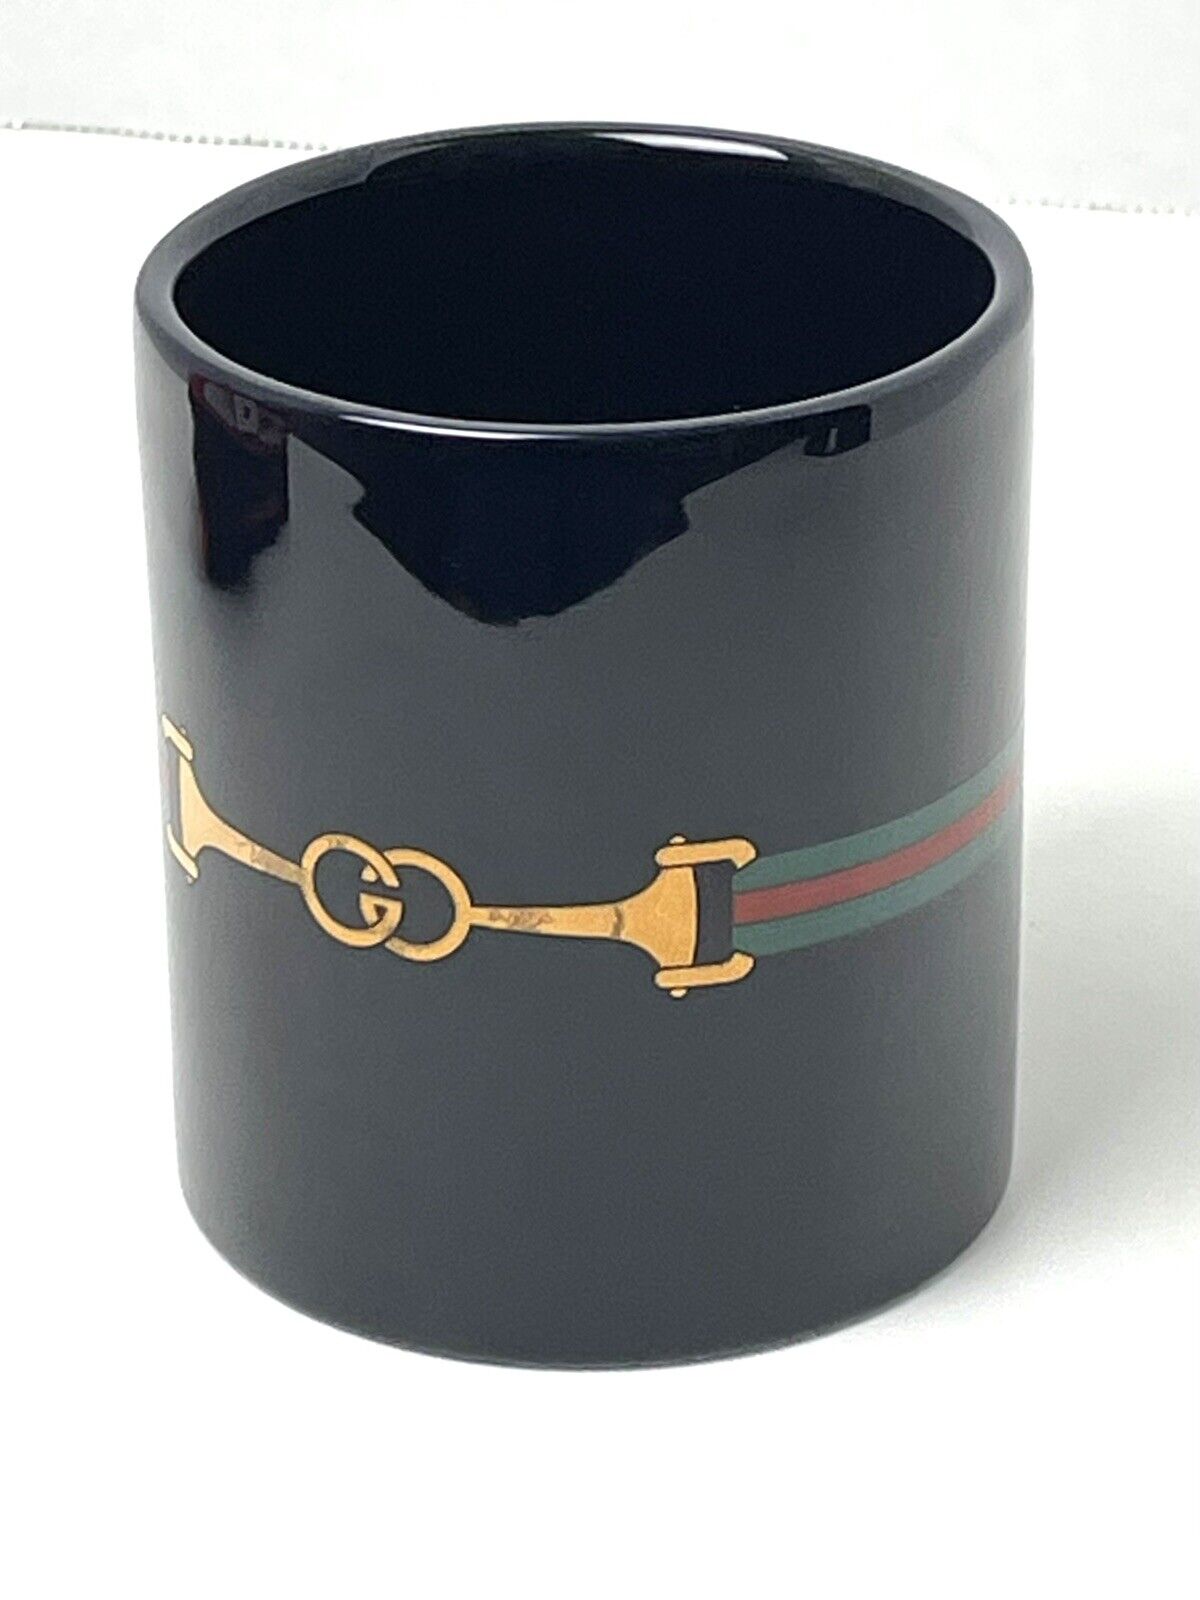 Vintage Gucci Horsebit Porcelain Mug Black Gold Authentic Made in Italy